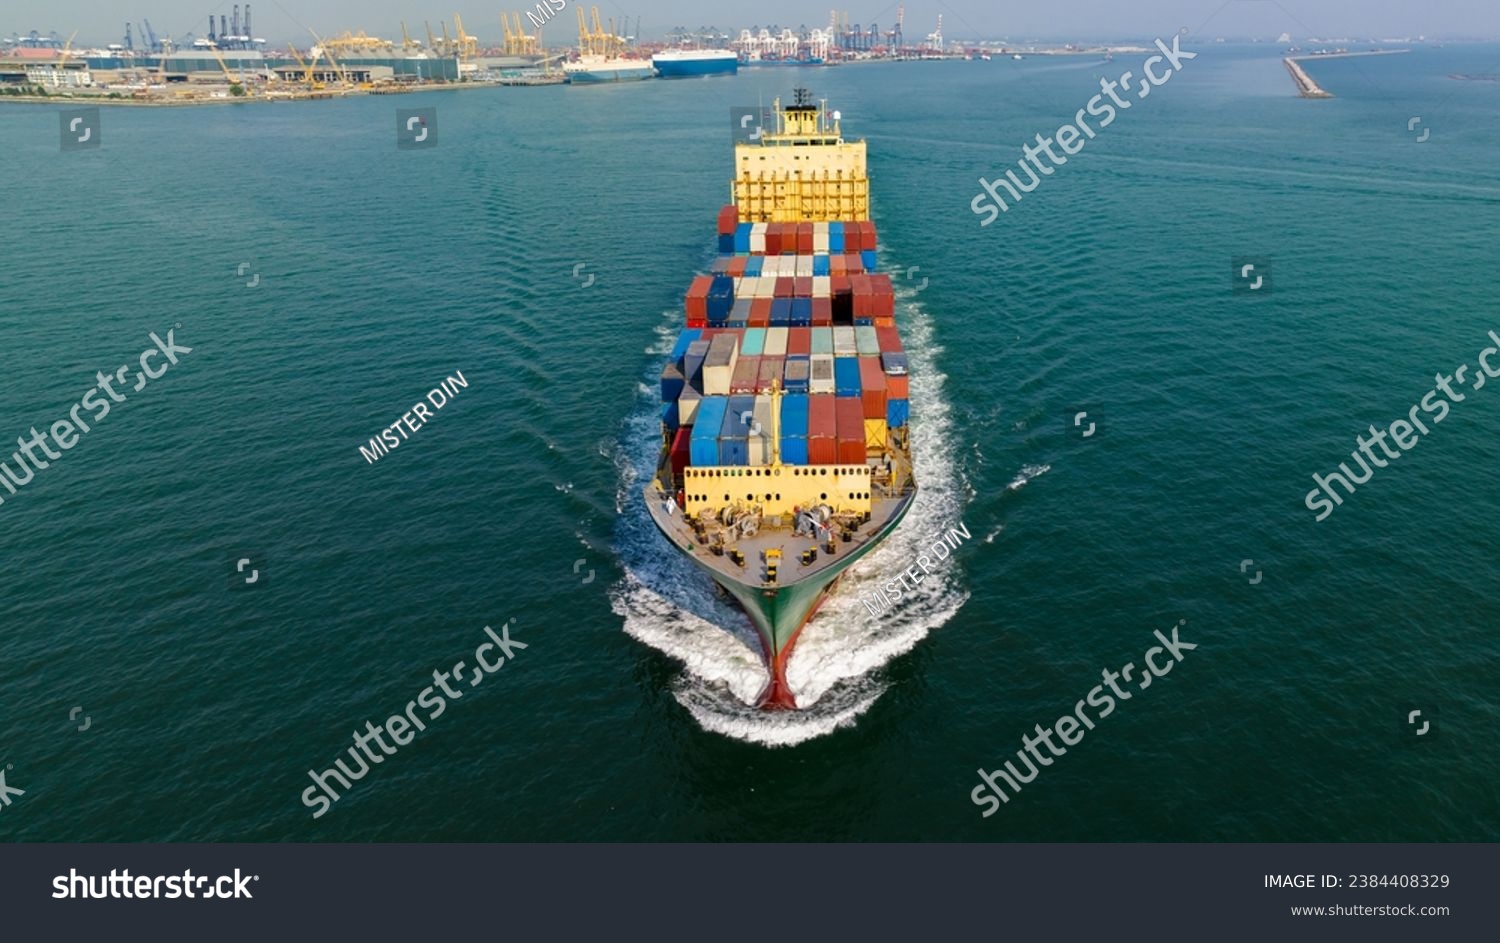 cargo container shipping sailing in sea import export logistic goods and distributing products to dealerand consumers across worldwide, by container ship Transport, business service. front view drone  #2384408329